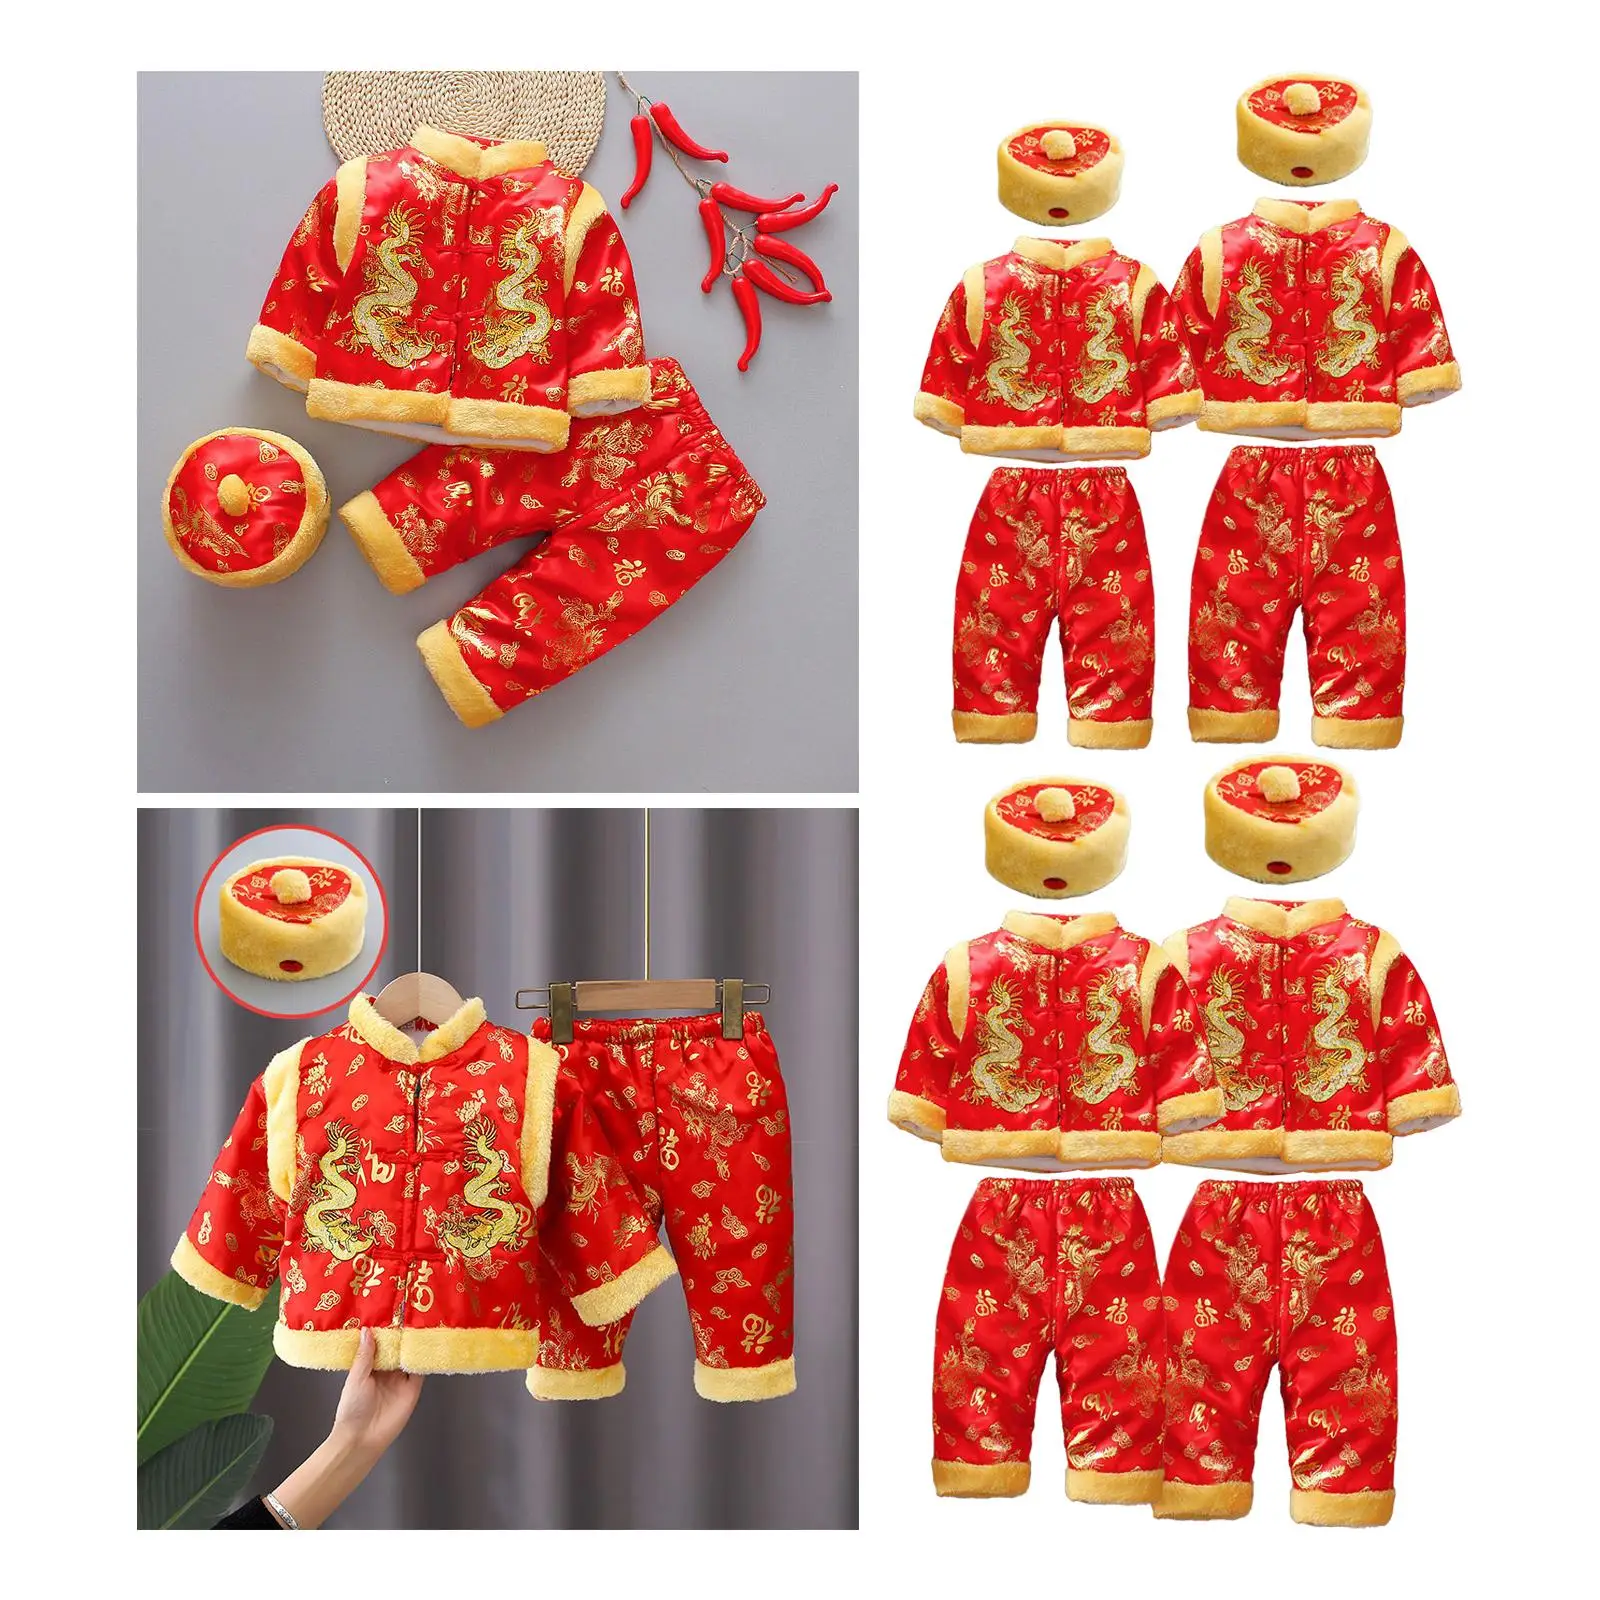 Newborn Infant Bodysuit Winter Boy Girl Tang Suit for Moon Festival Xmas Birthday Party Traditional Event Full-month Celebration